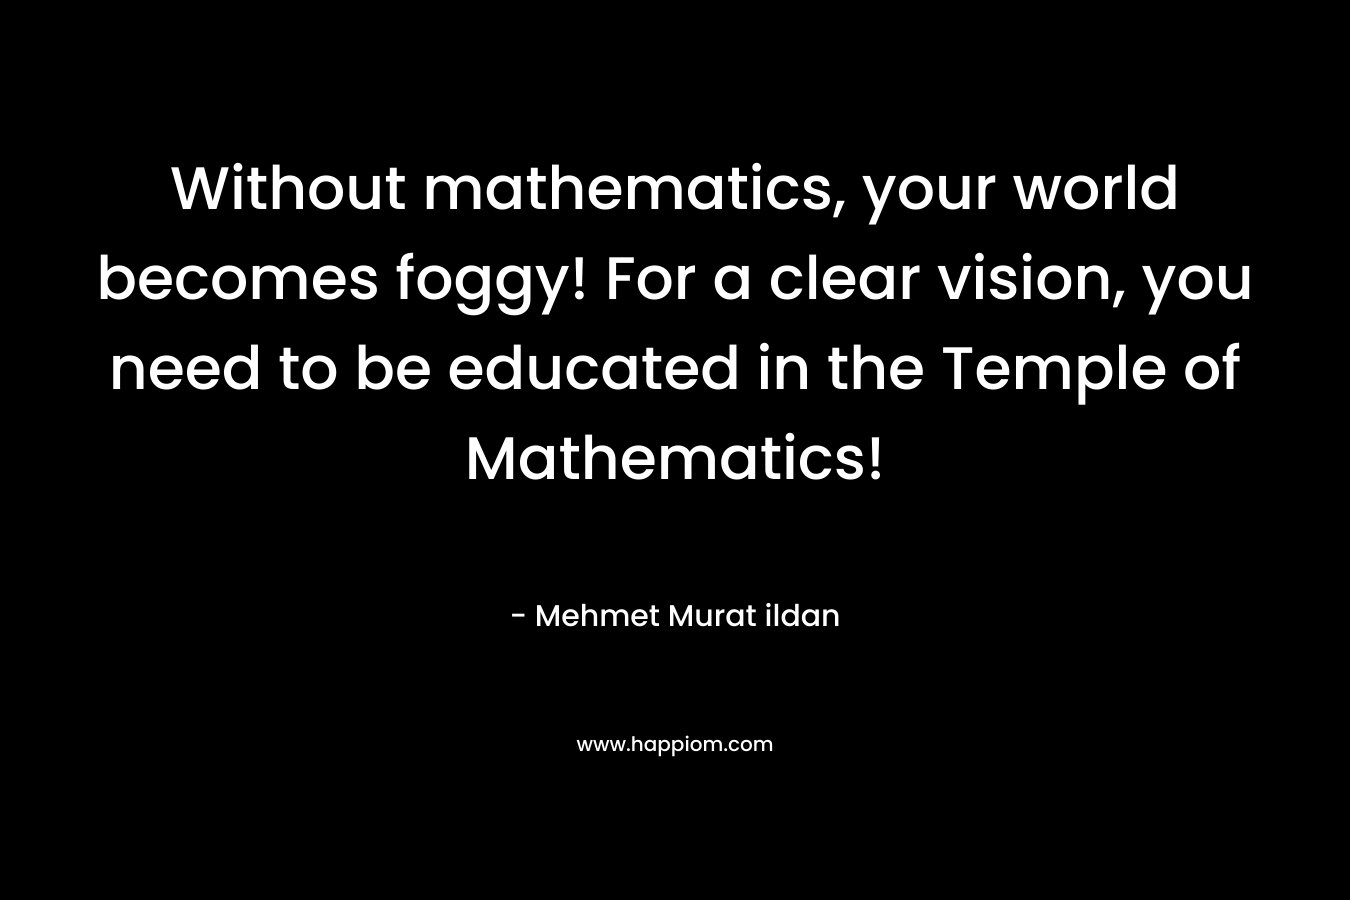 Without mathematics, your world becomes foggy! For a clear vision, you need to be educated in the Temple of Mathematics! – Mehmet Murat ildan